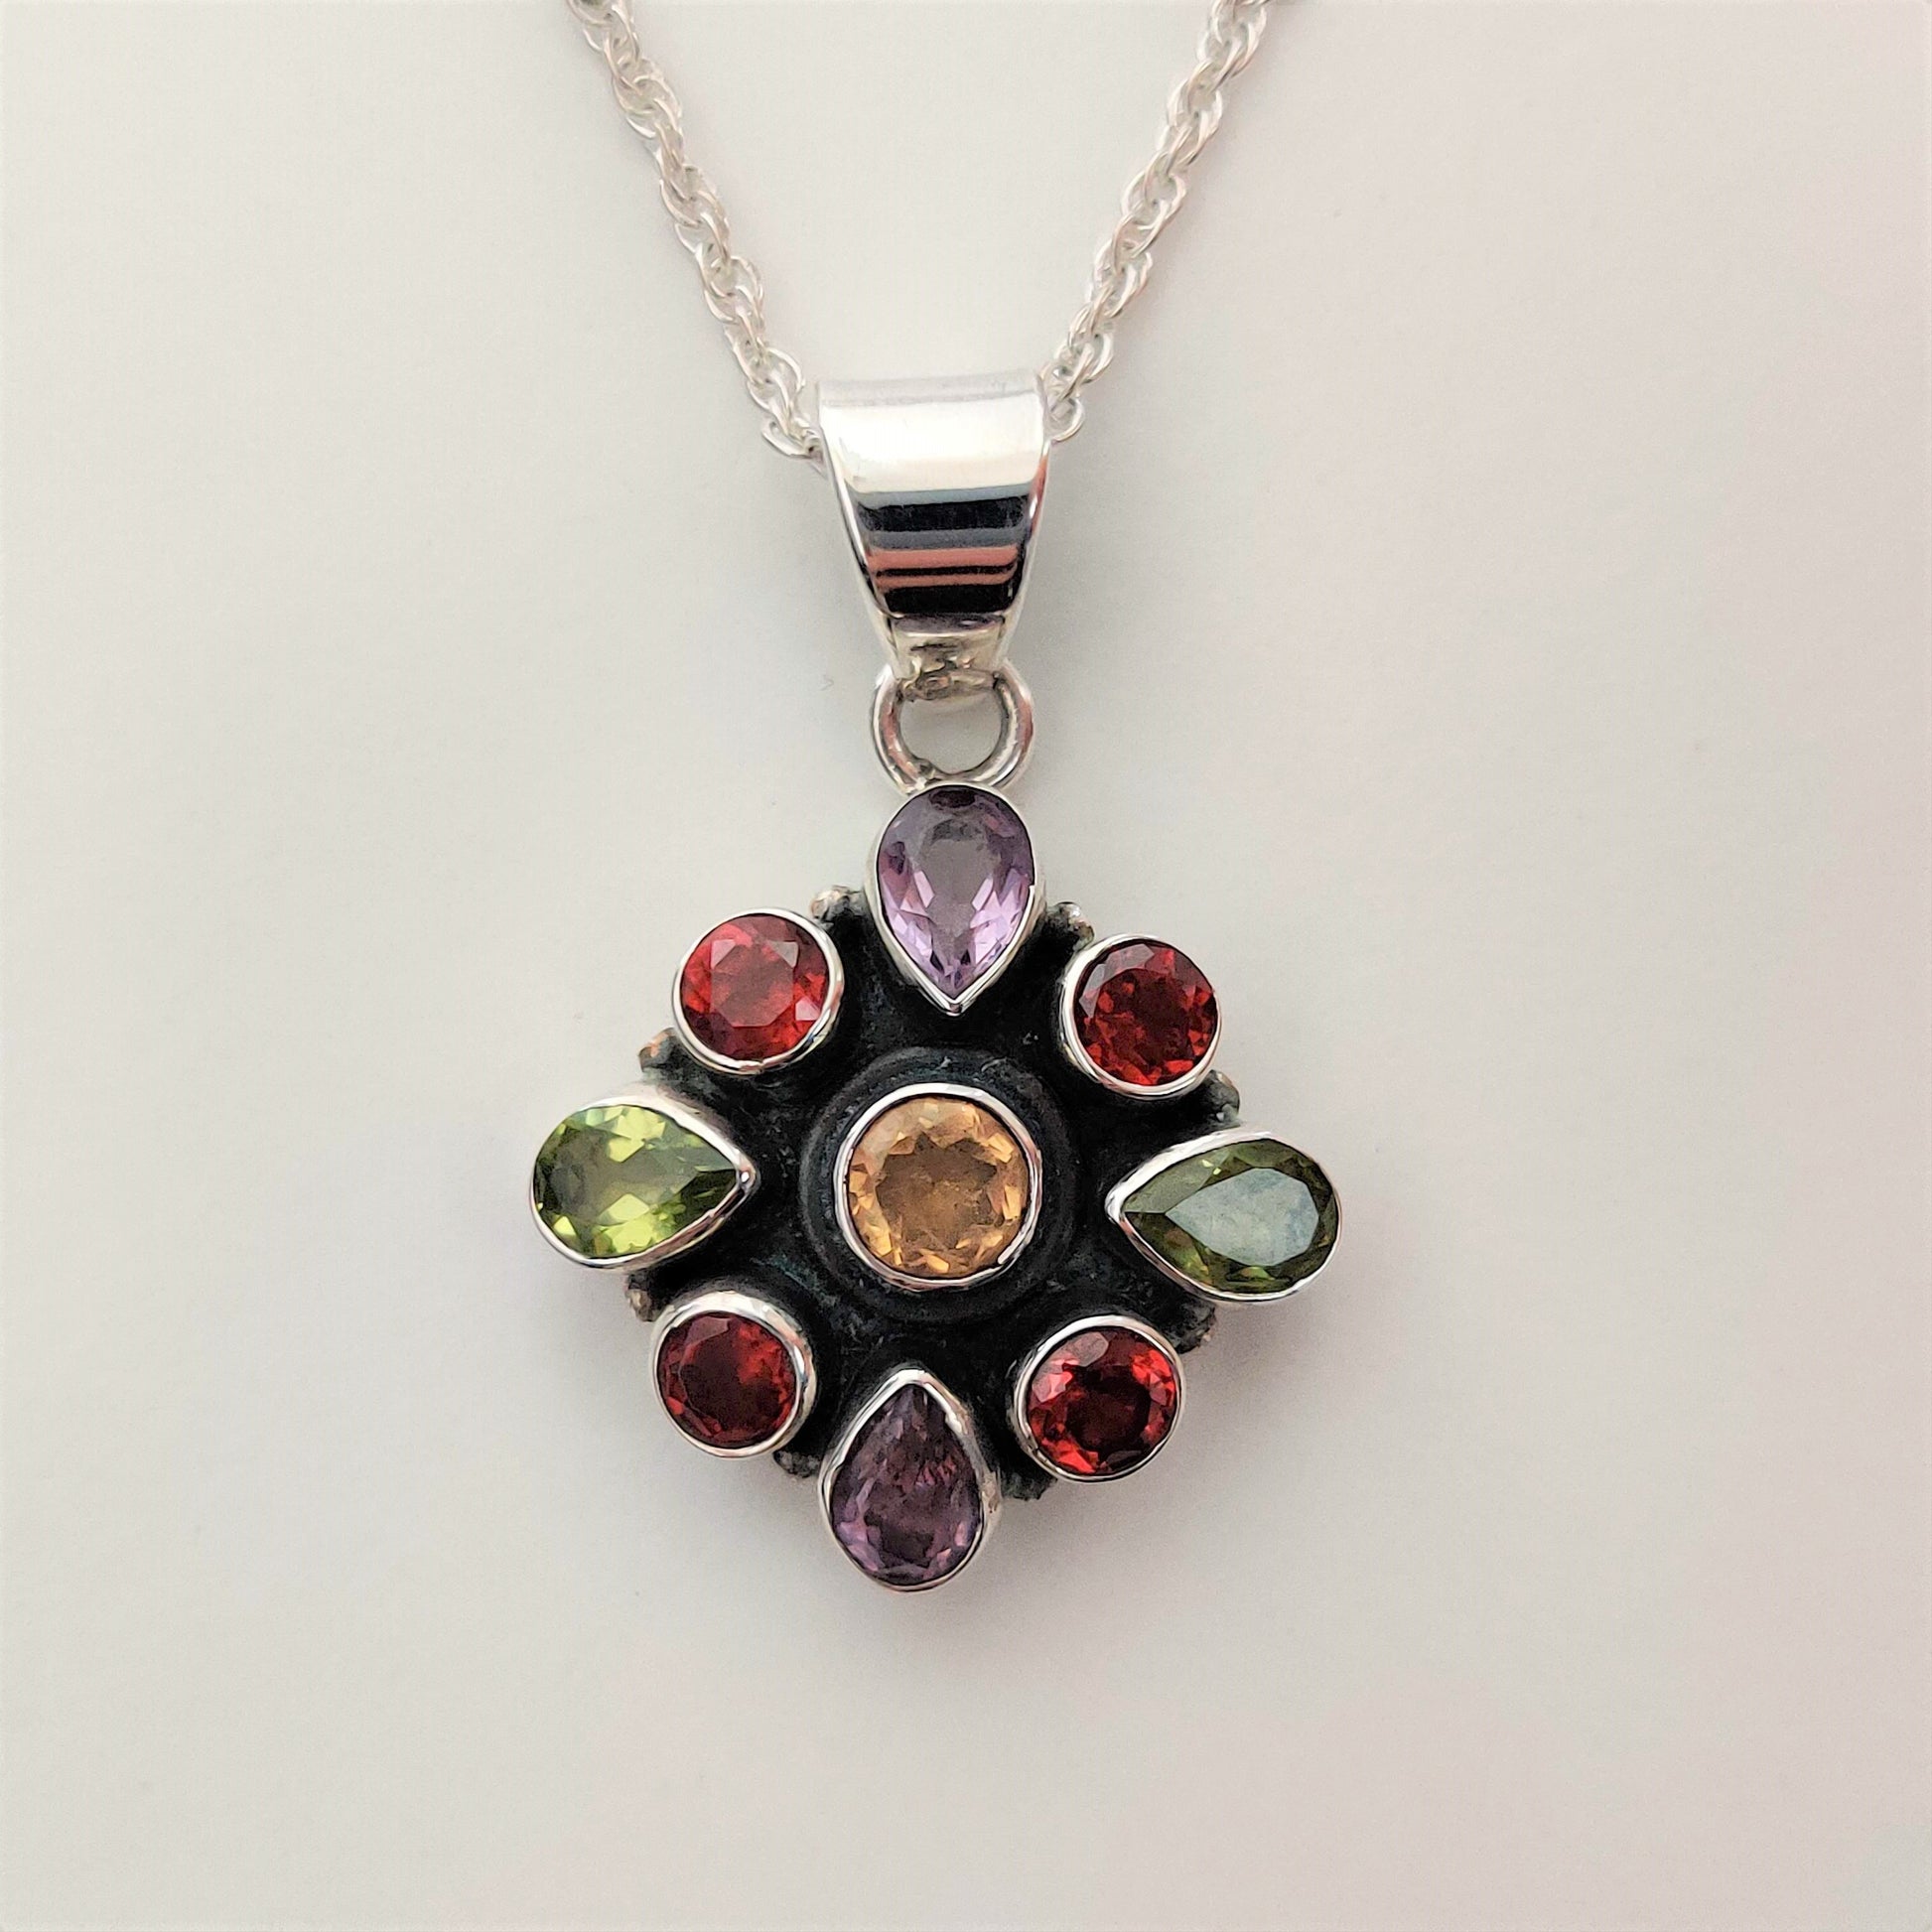 Peridot, Amethyst, Ruby and Citrine Flower 925 Sterling Silver Pendant - Rivendell Shop